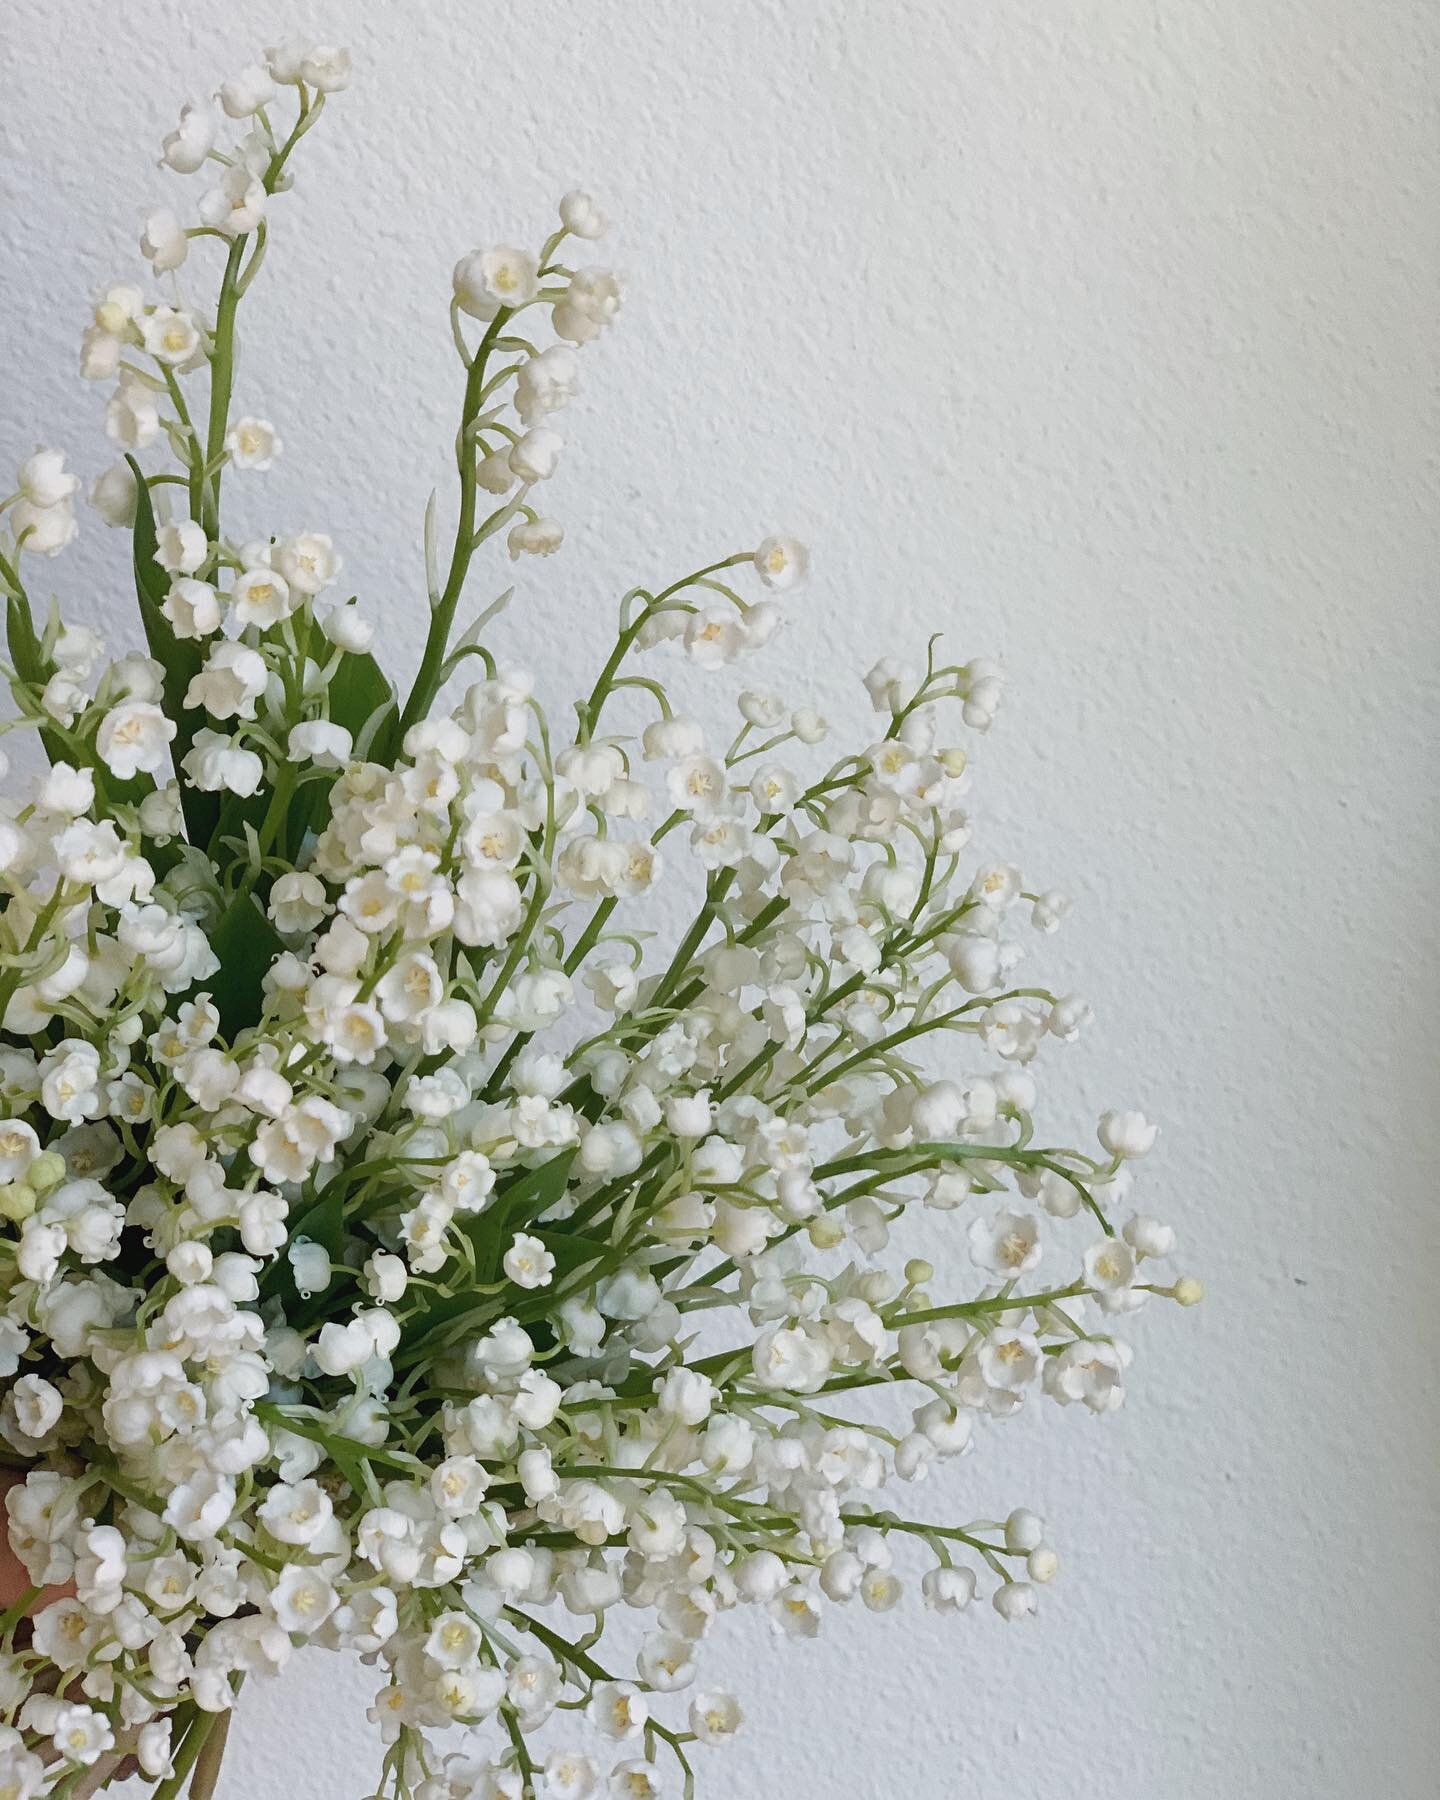 Lily of the Valley bouquet for @the___wildflowers // Simply put, my heart is beaming after yesterday. I owe endless thanks to the dozens of hands that worked so hard to make such a vision happen. I cannot wait to share more, but for now let us enjoy 